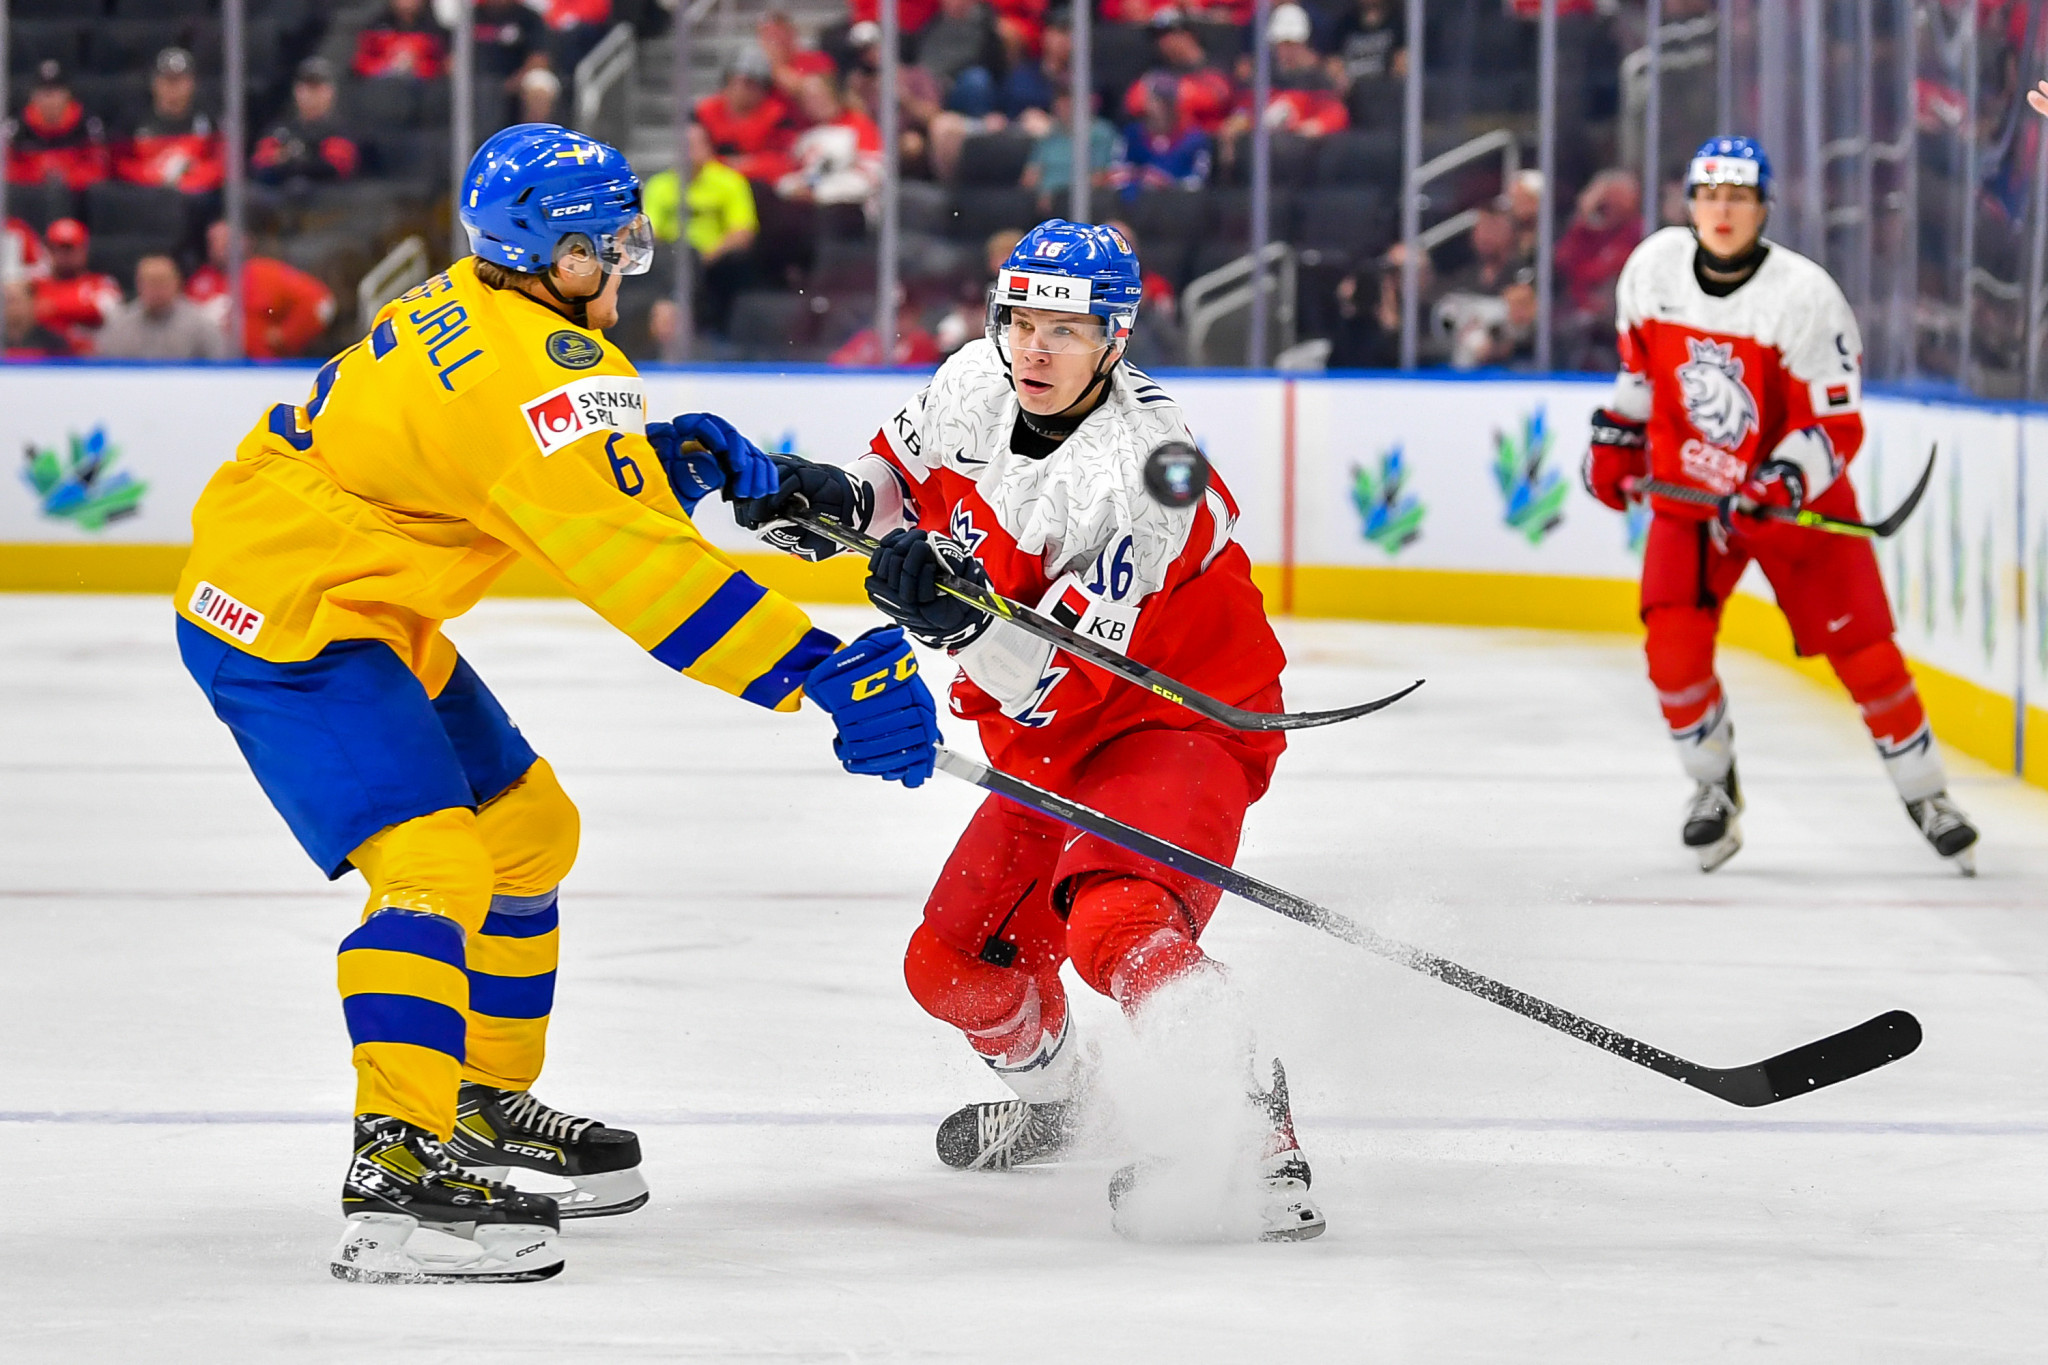 Attendances at the Men's World Junior Ice Hockey Championship were low ©Getty Images